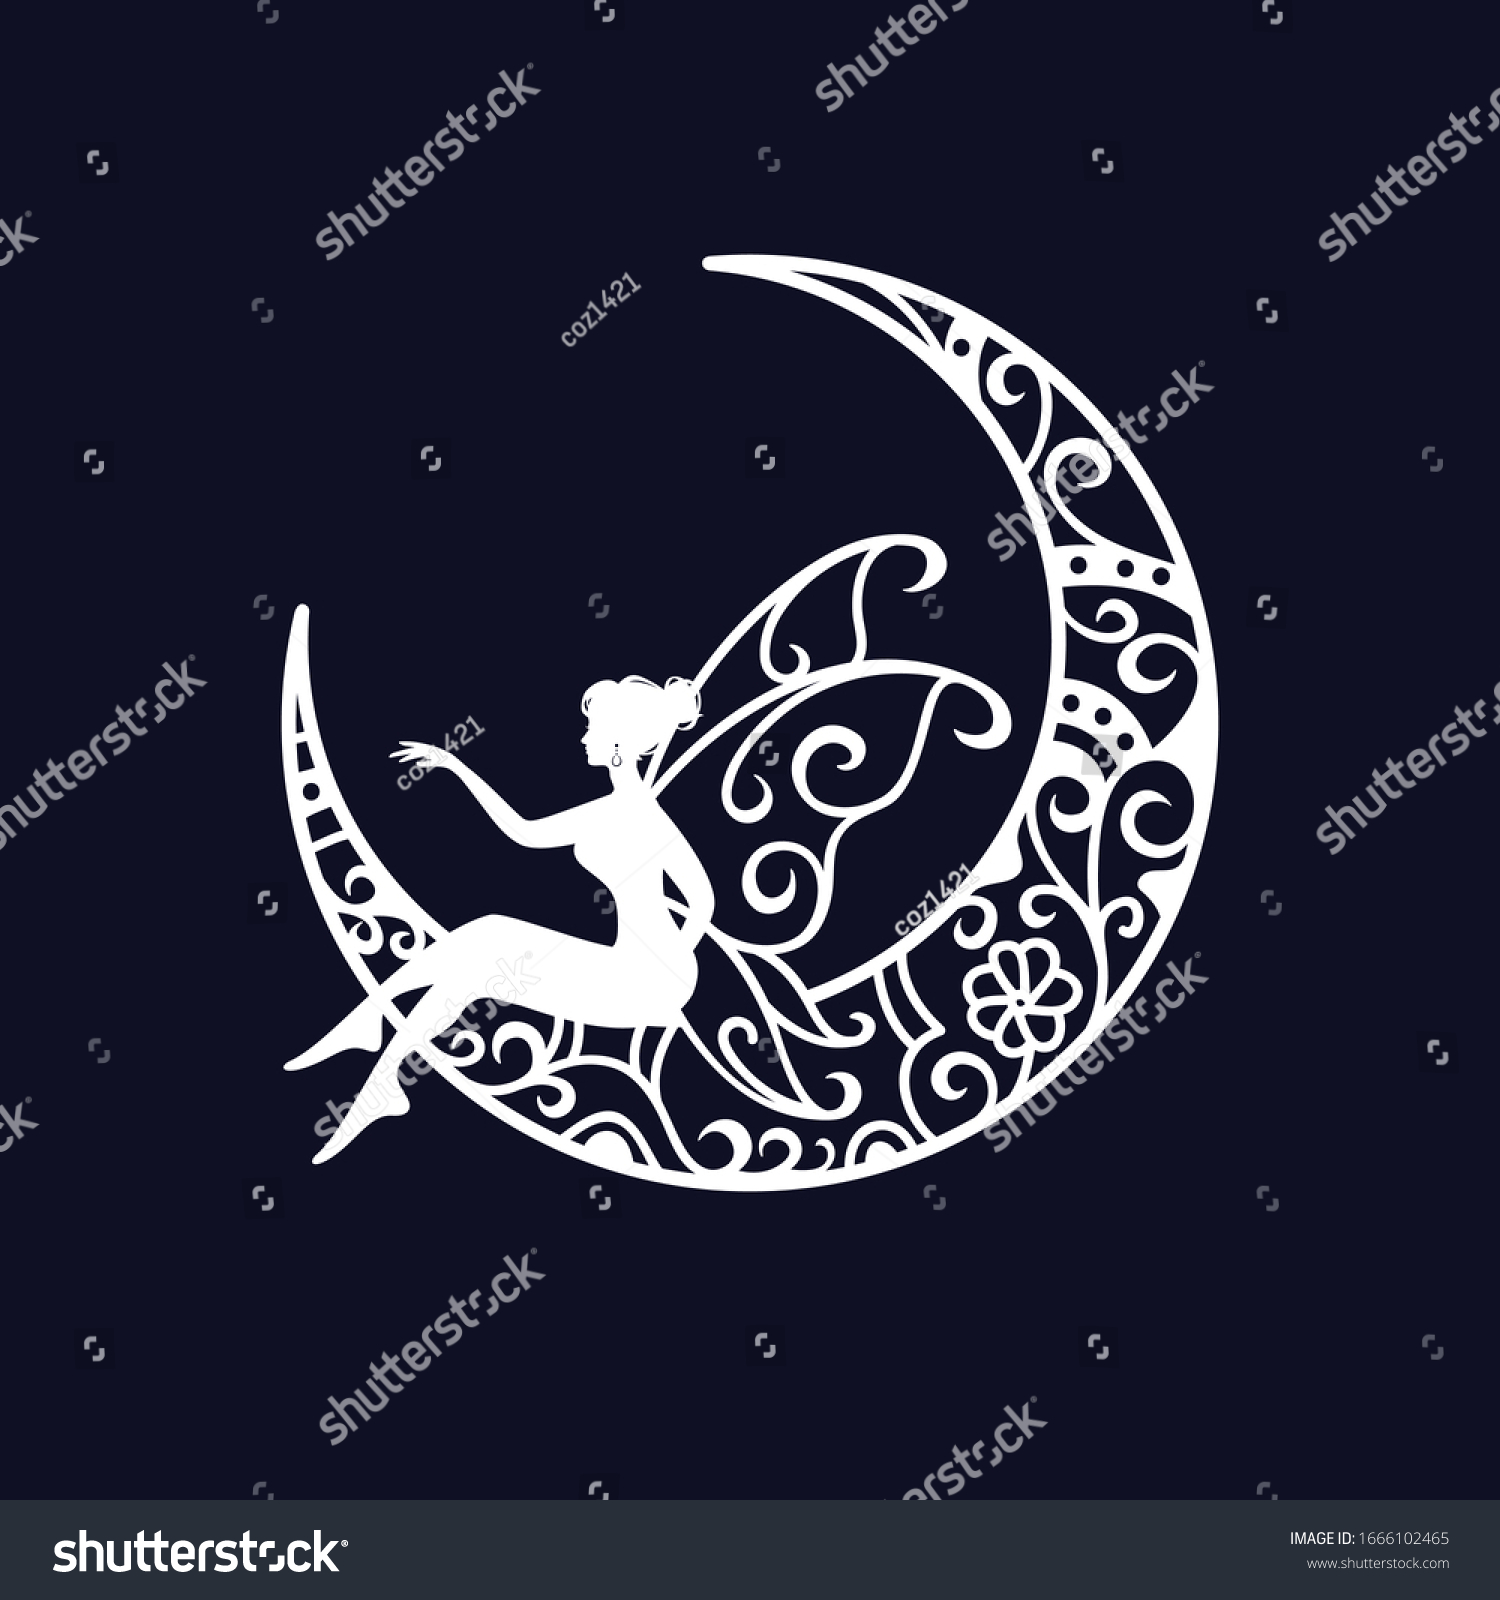 Download Fairy Crescent Moon Cut File Illustration Stock Vector Royalty Free 1666102465